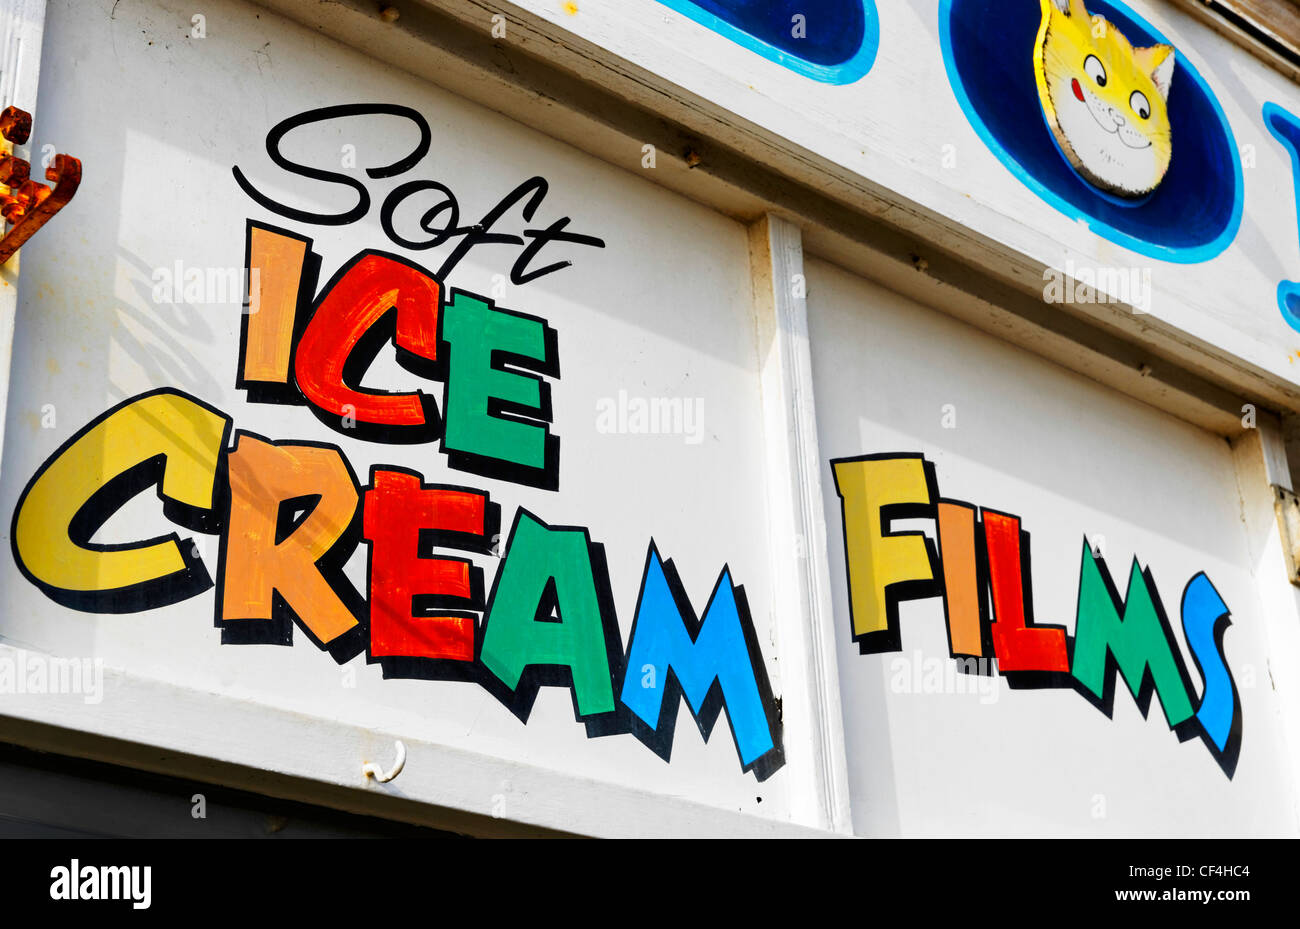 Soft Ice Cream and Films written in colourful lettering on a sign above a shop on the seafront at Paignton on the English Rivier Stock Photo